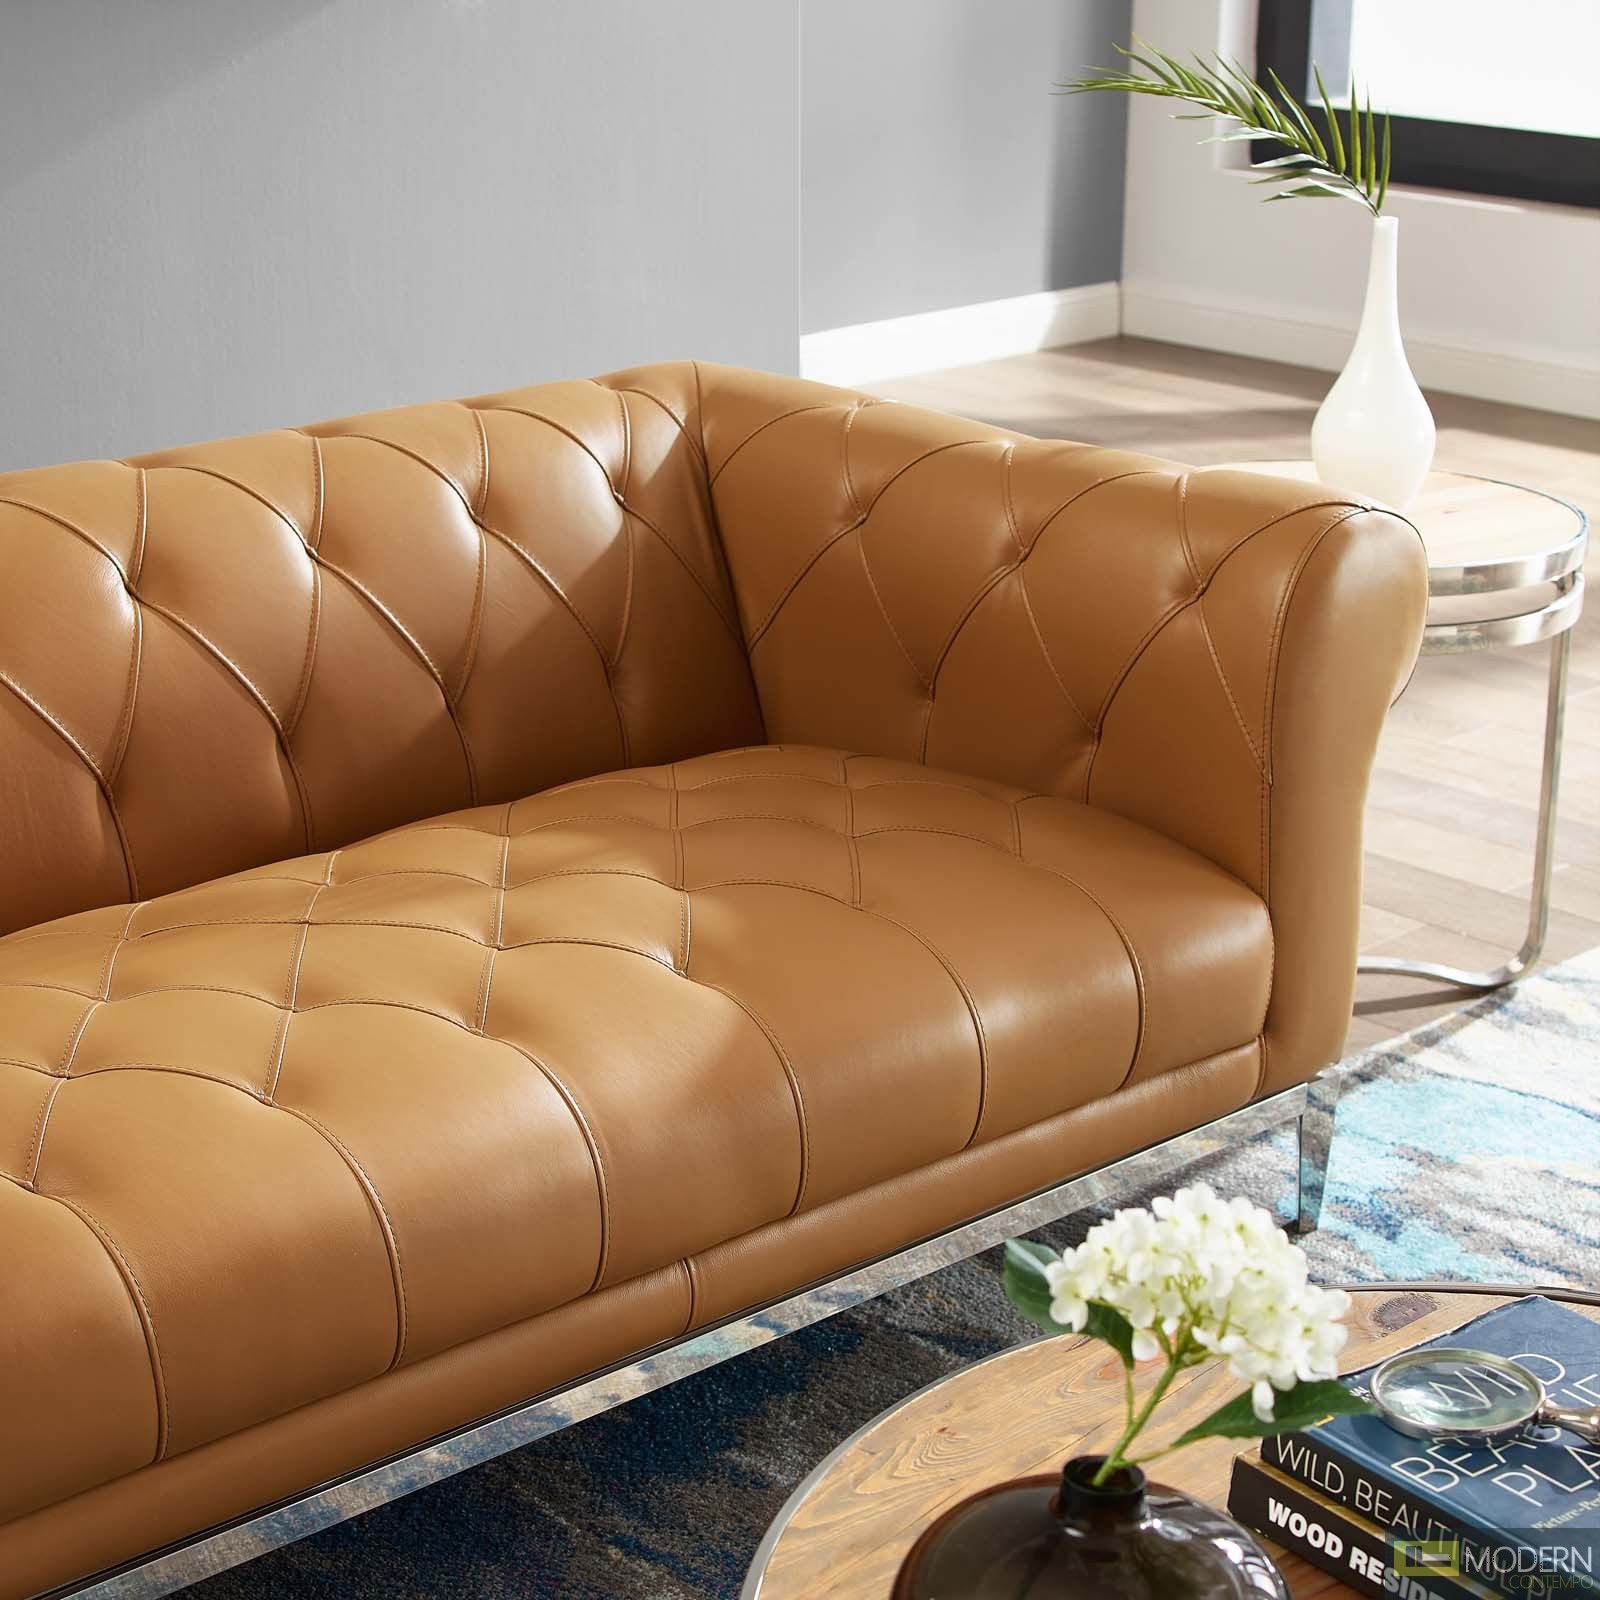 Modern Contempo – Cyprus Tufted Button Upholstered Leather Chesterfield Throughout Tufted Upholstered Sofas (View 3 of 20)